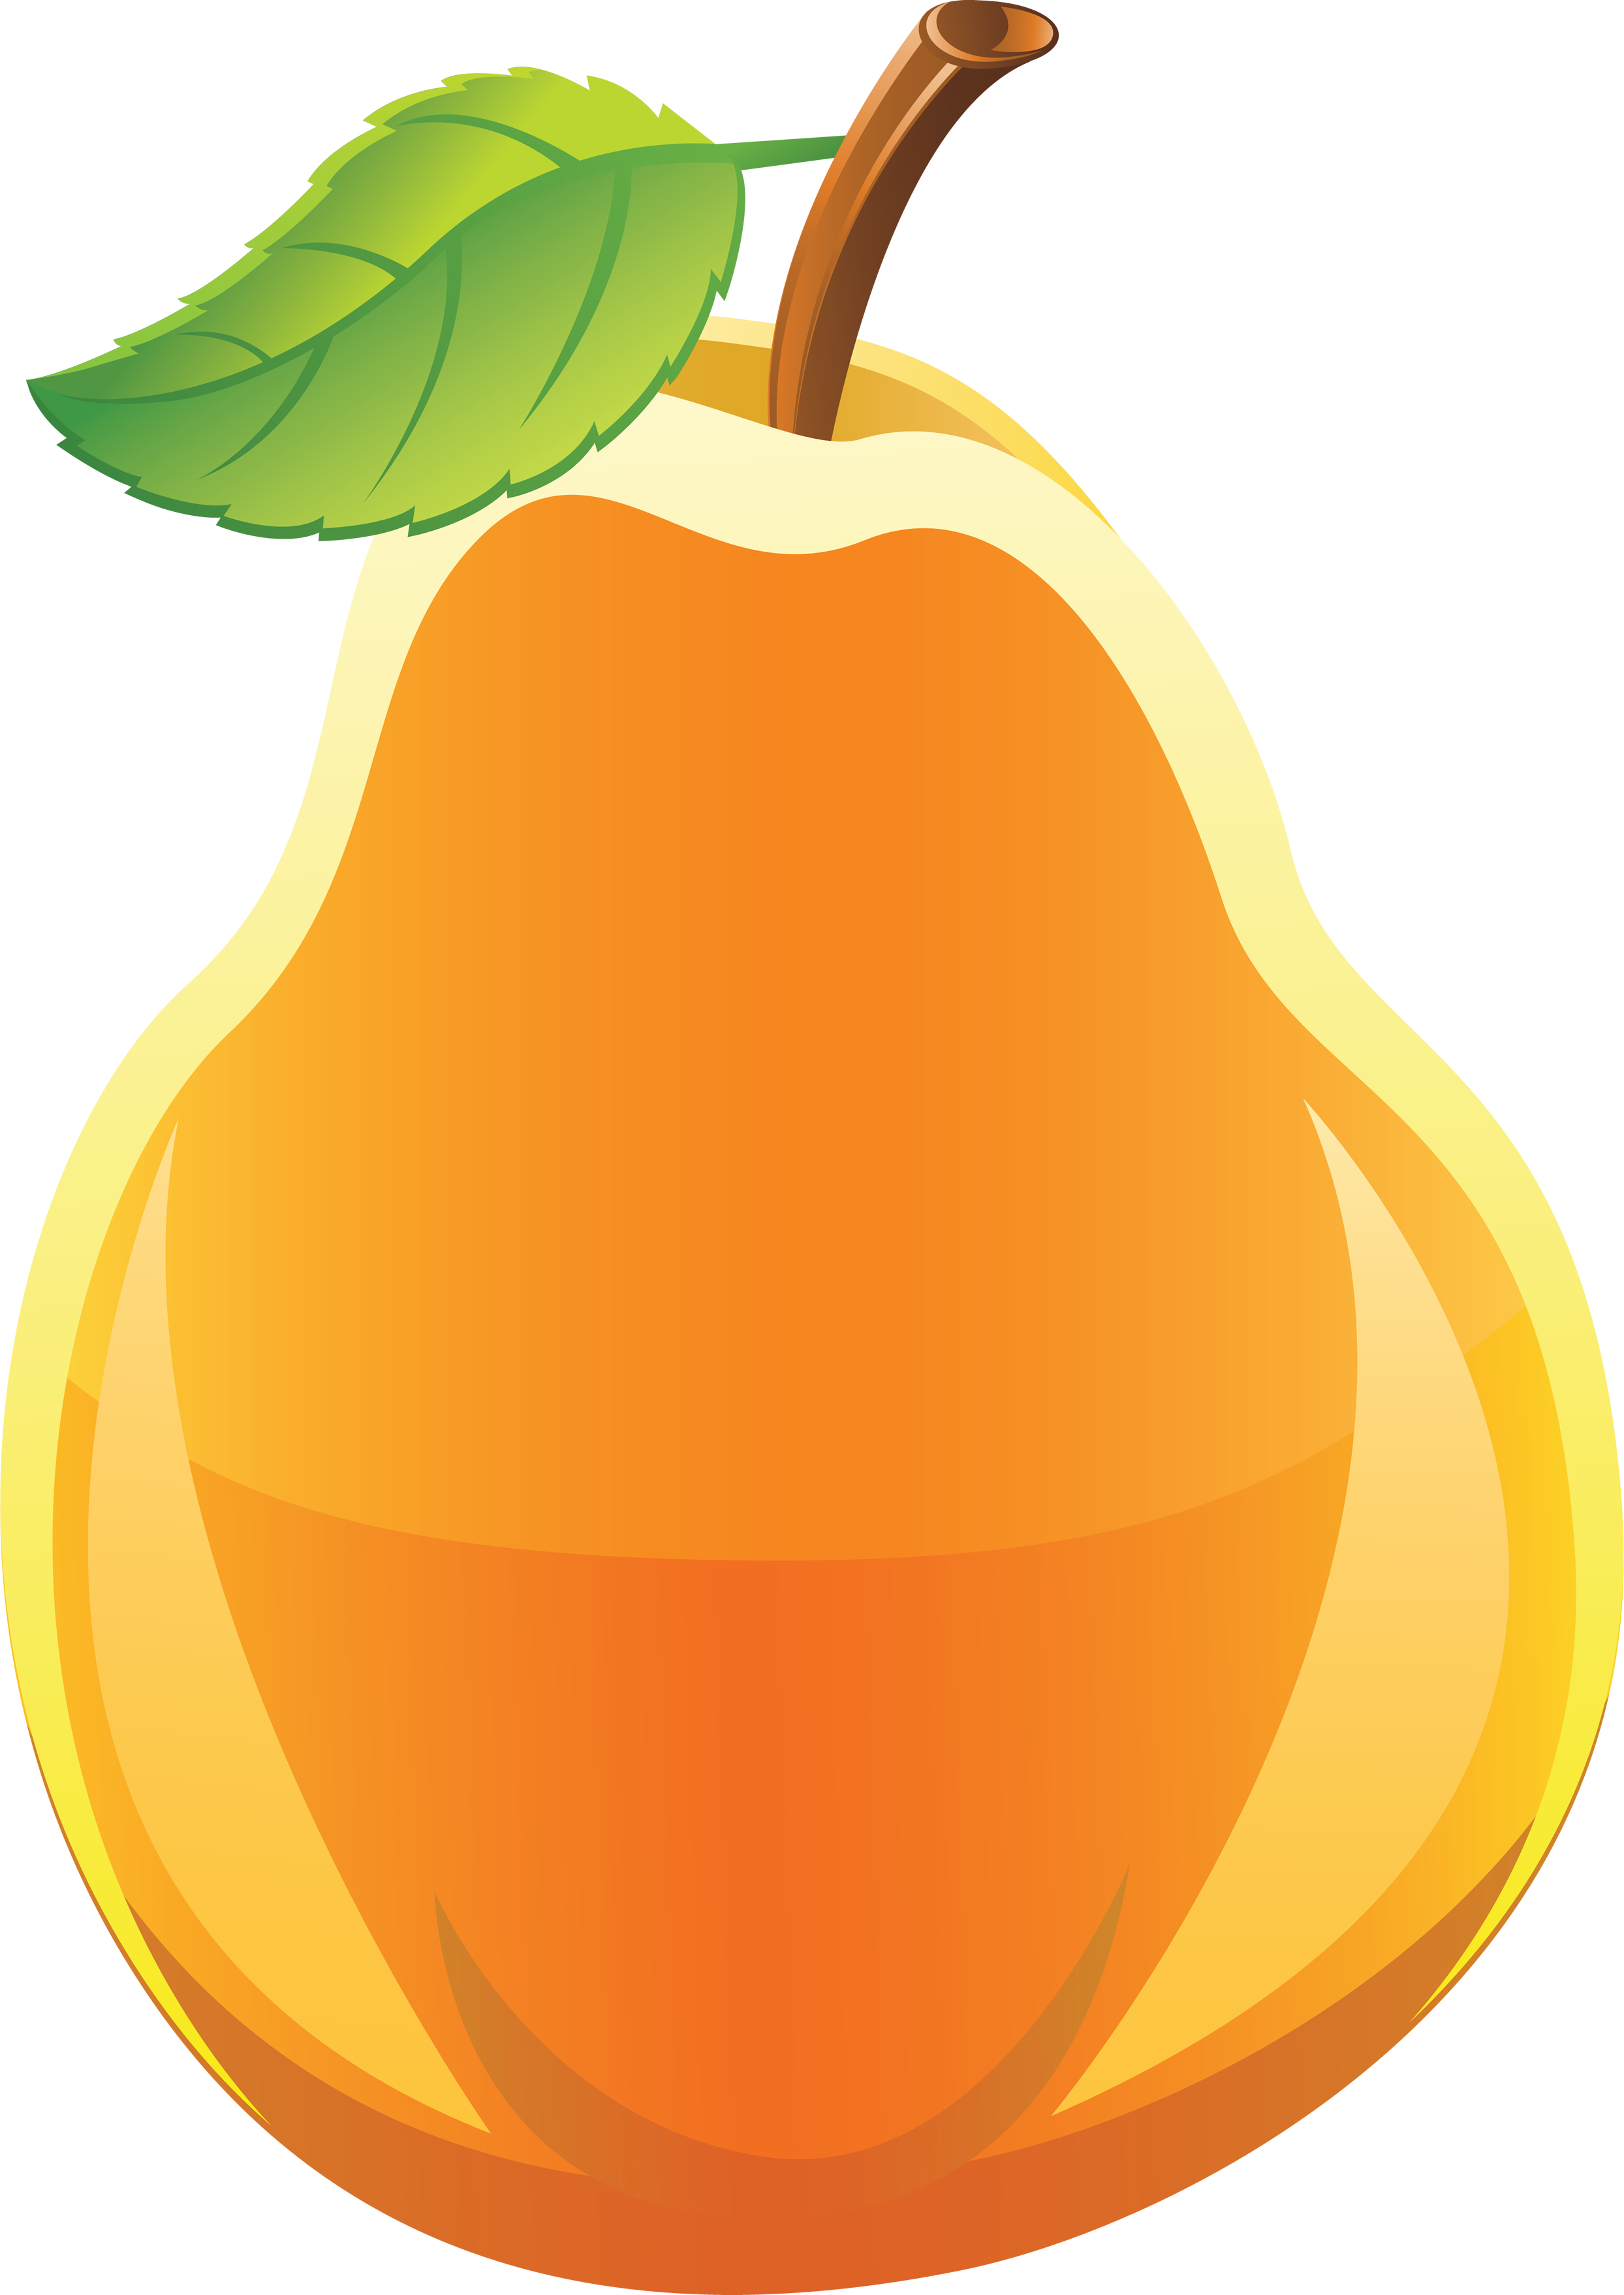 Pear - Pear Clipart Png (2488x3515)